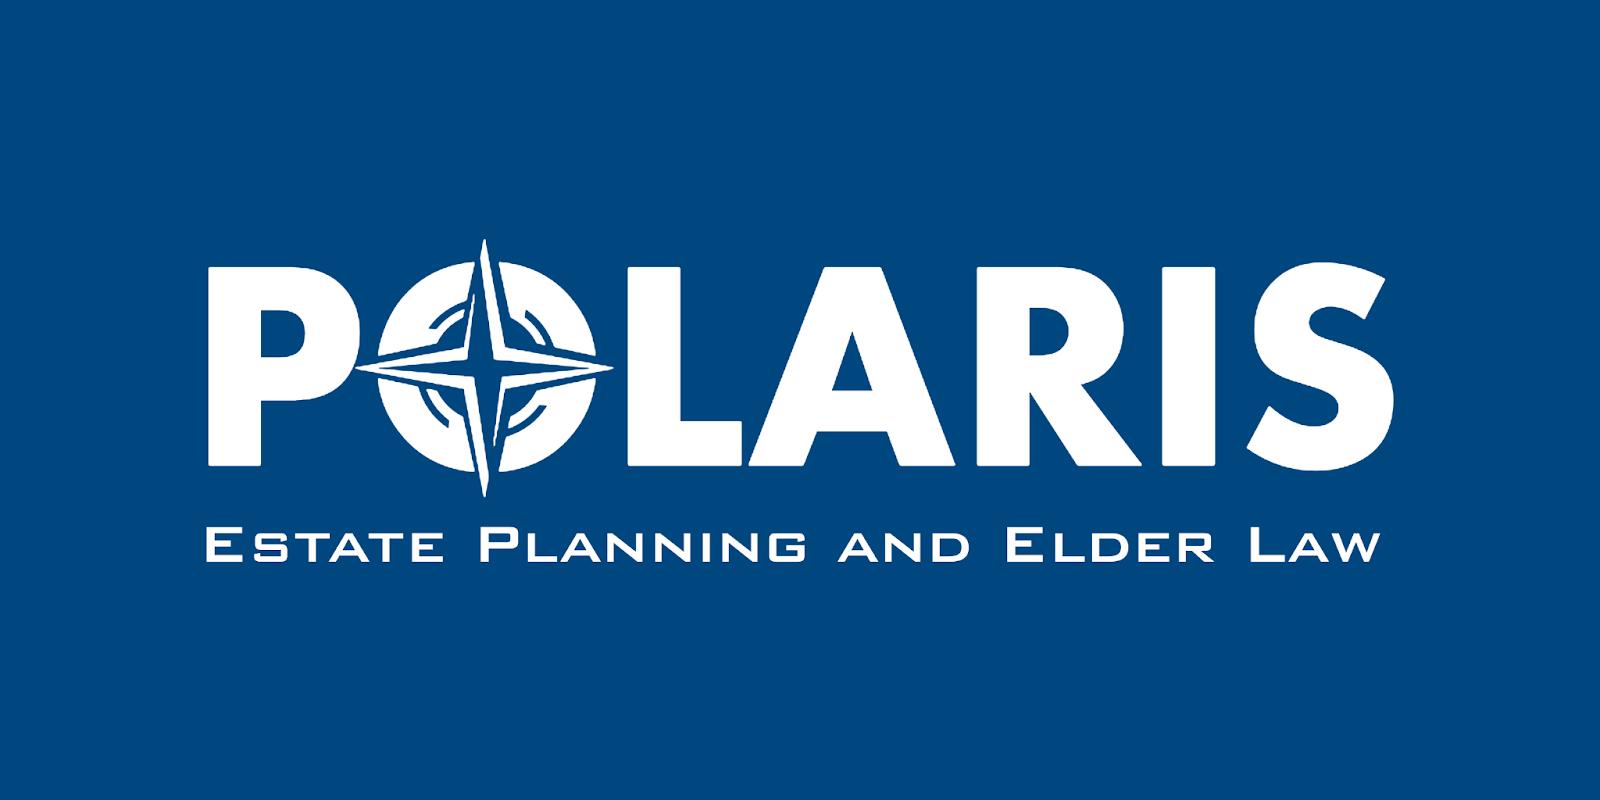 Polaris Estate Planning and Elder Law | 1551 Wall St Suite 240, St Charles, MO 63303, United States | Phone: (636) 202-1364